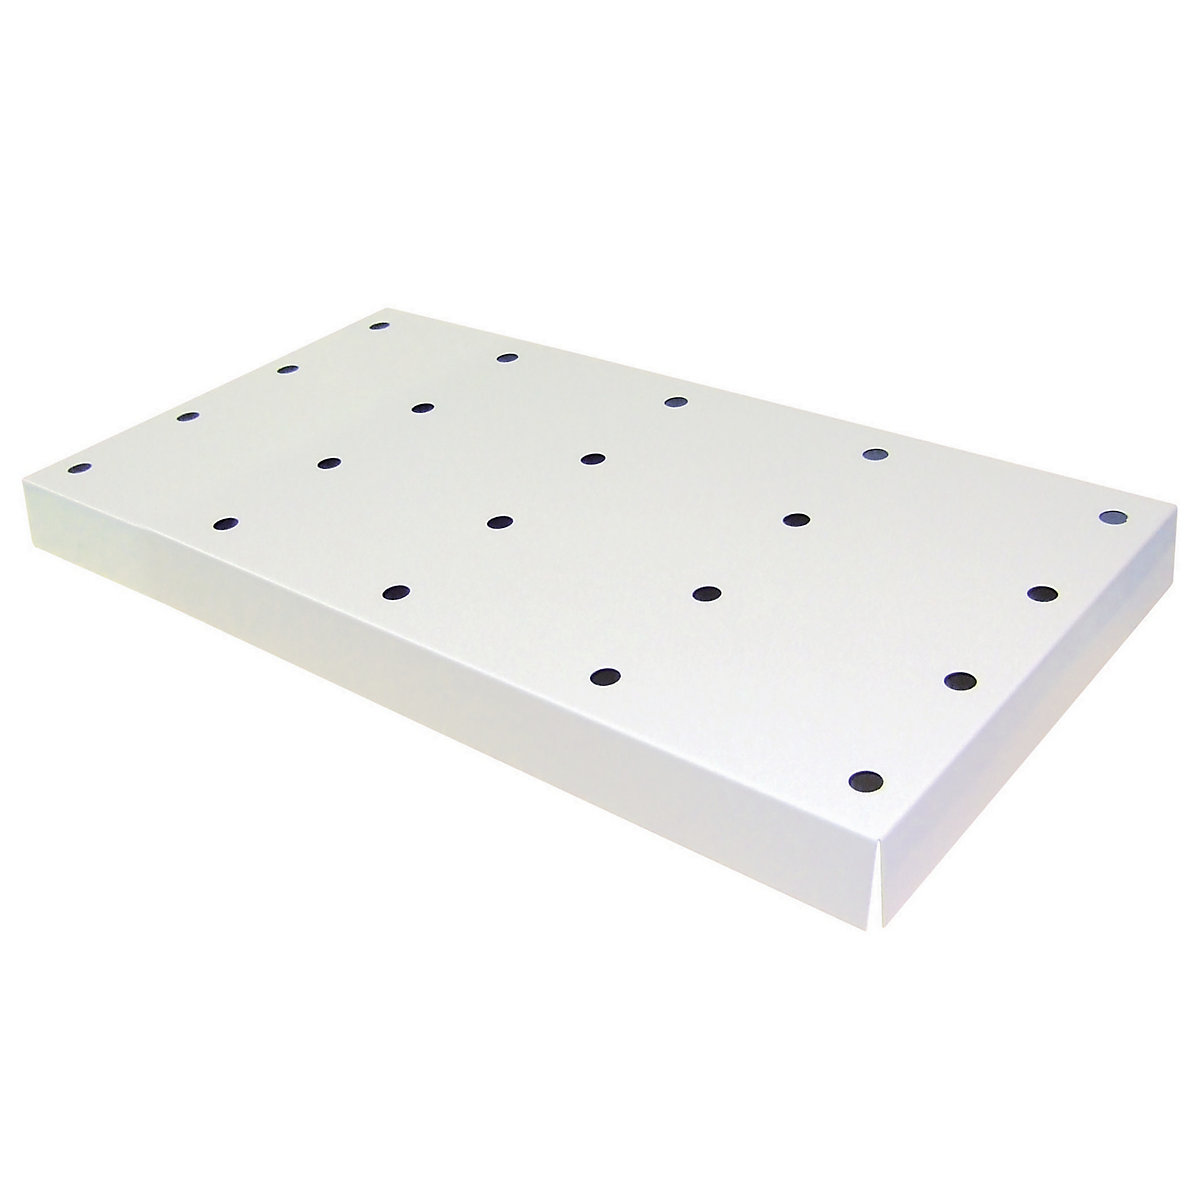 Perforated metal cover for base sump tray - asecos